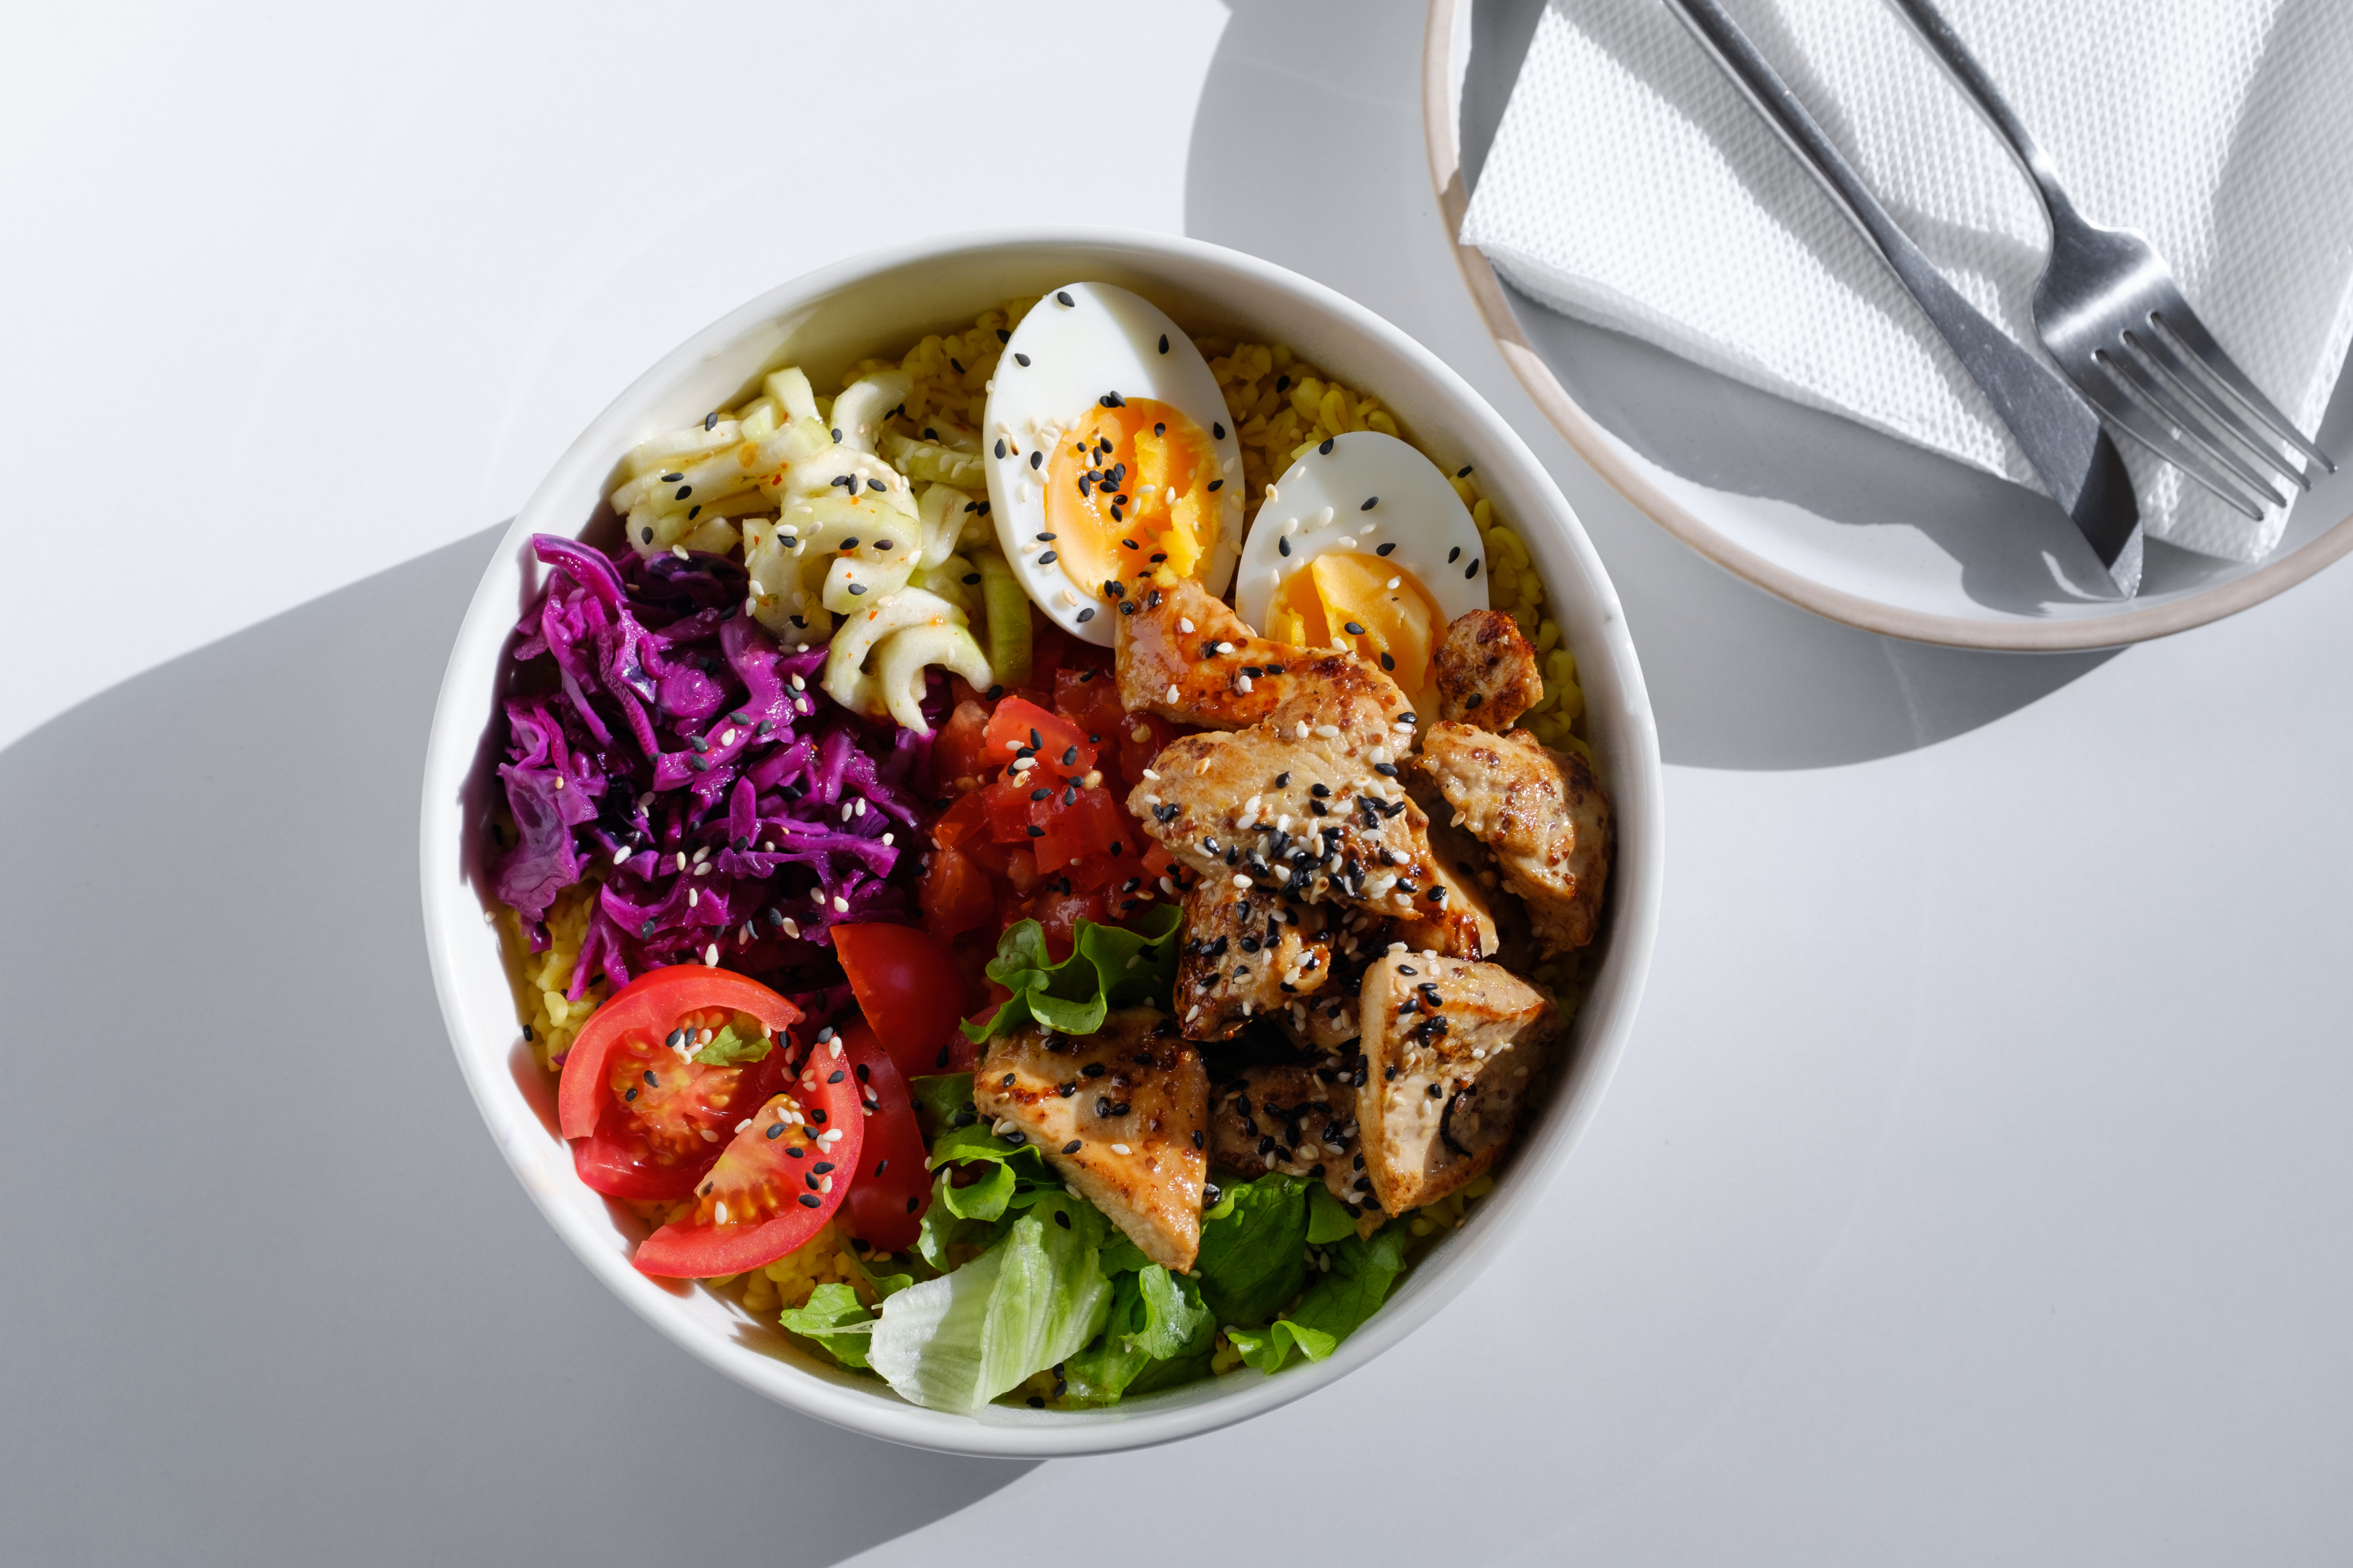 Bowl of healthy mixed salad with various toppings and a hard-boiled egg